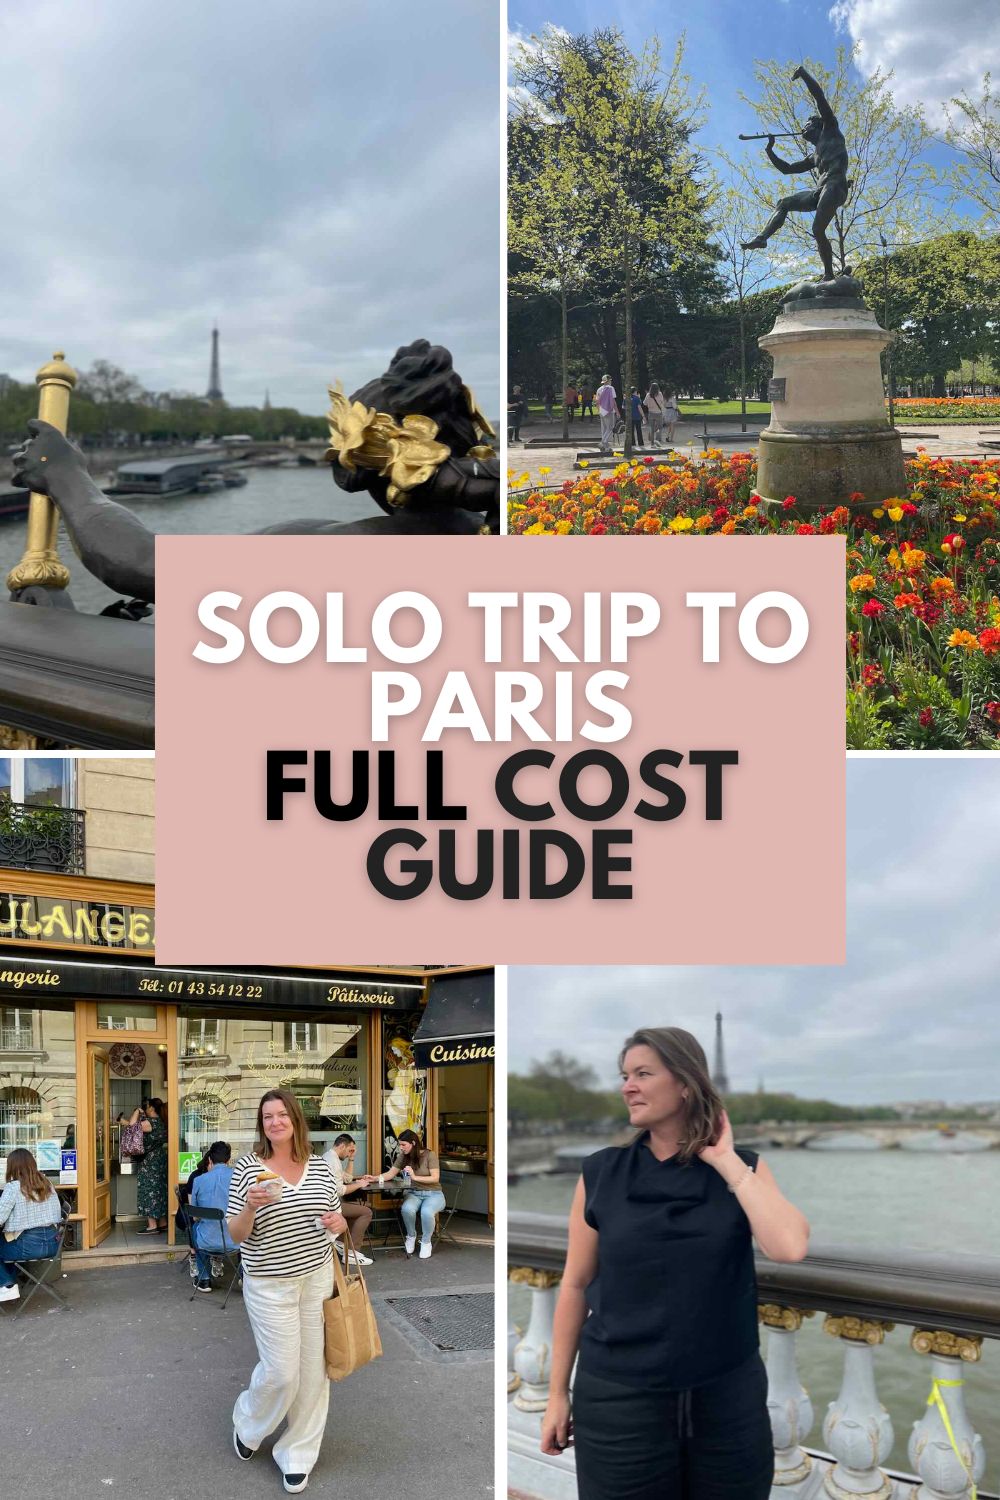 A collage of images showing scenes from Paris, including a view of the Eiffel Tower from a bridge, a statue in a colorful garden, a bakery with people seated outside, and a woman in a black outfit standing by the river. The text in the center reads "Solo Trip to Paris Full Cost Guide